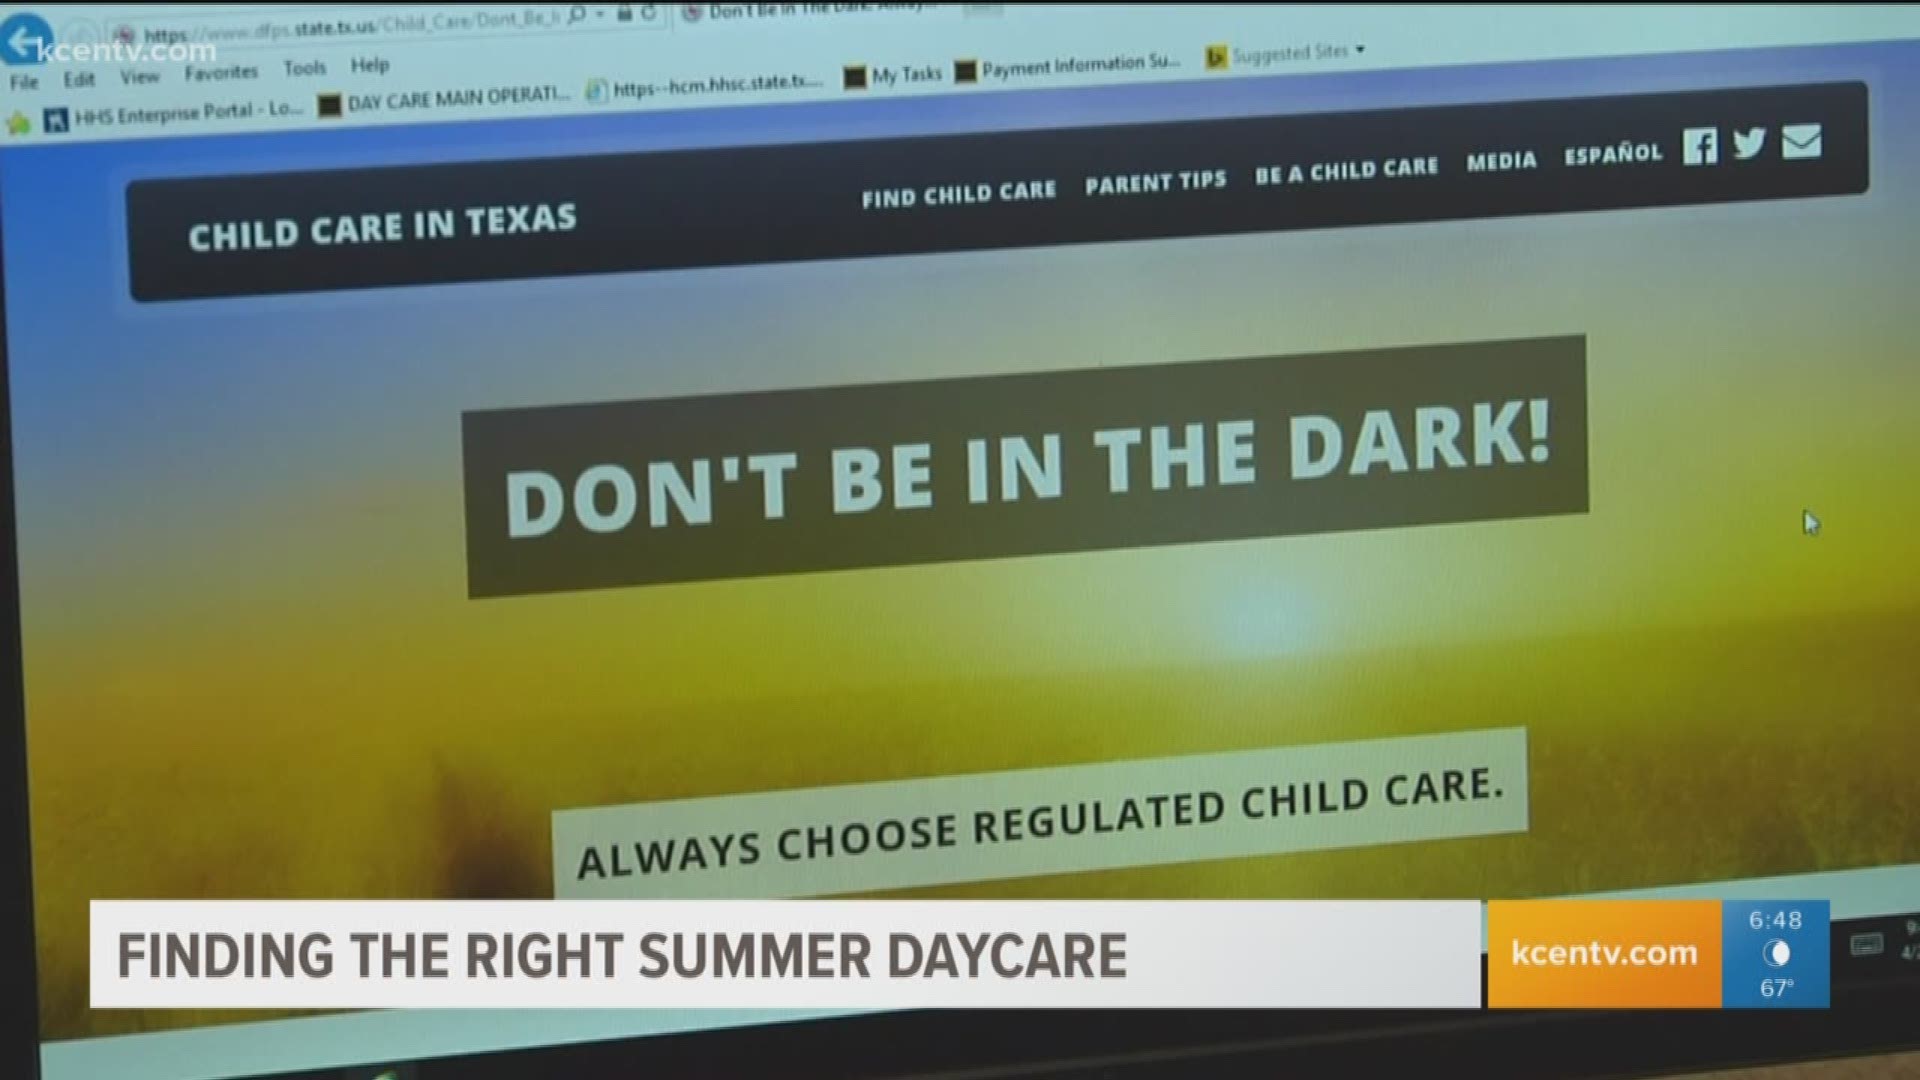 Finding the right daycare for your child